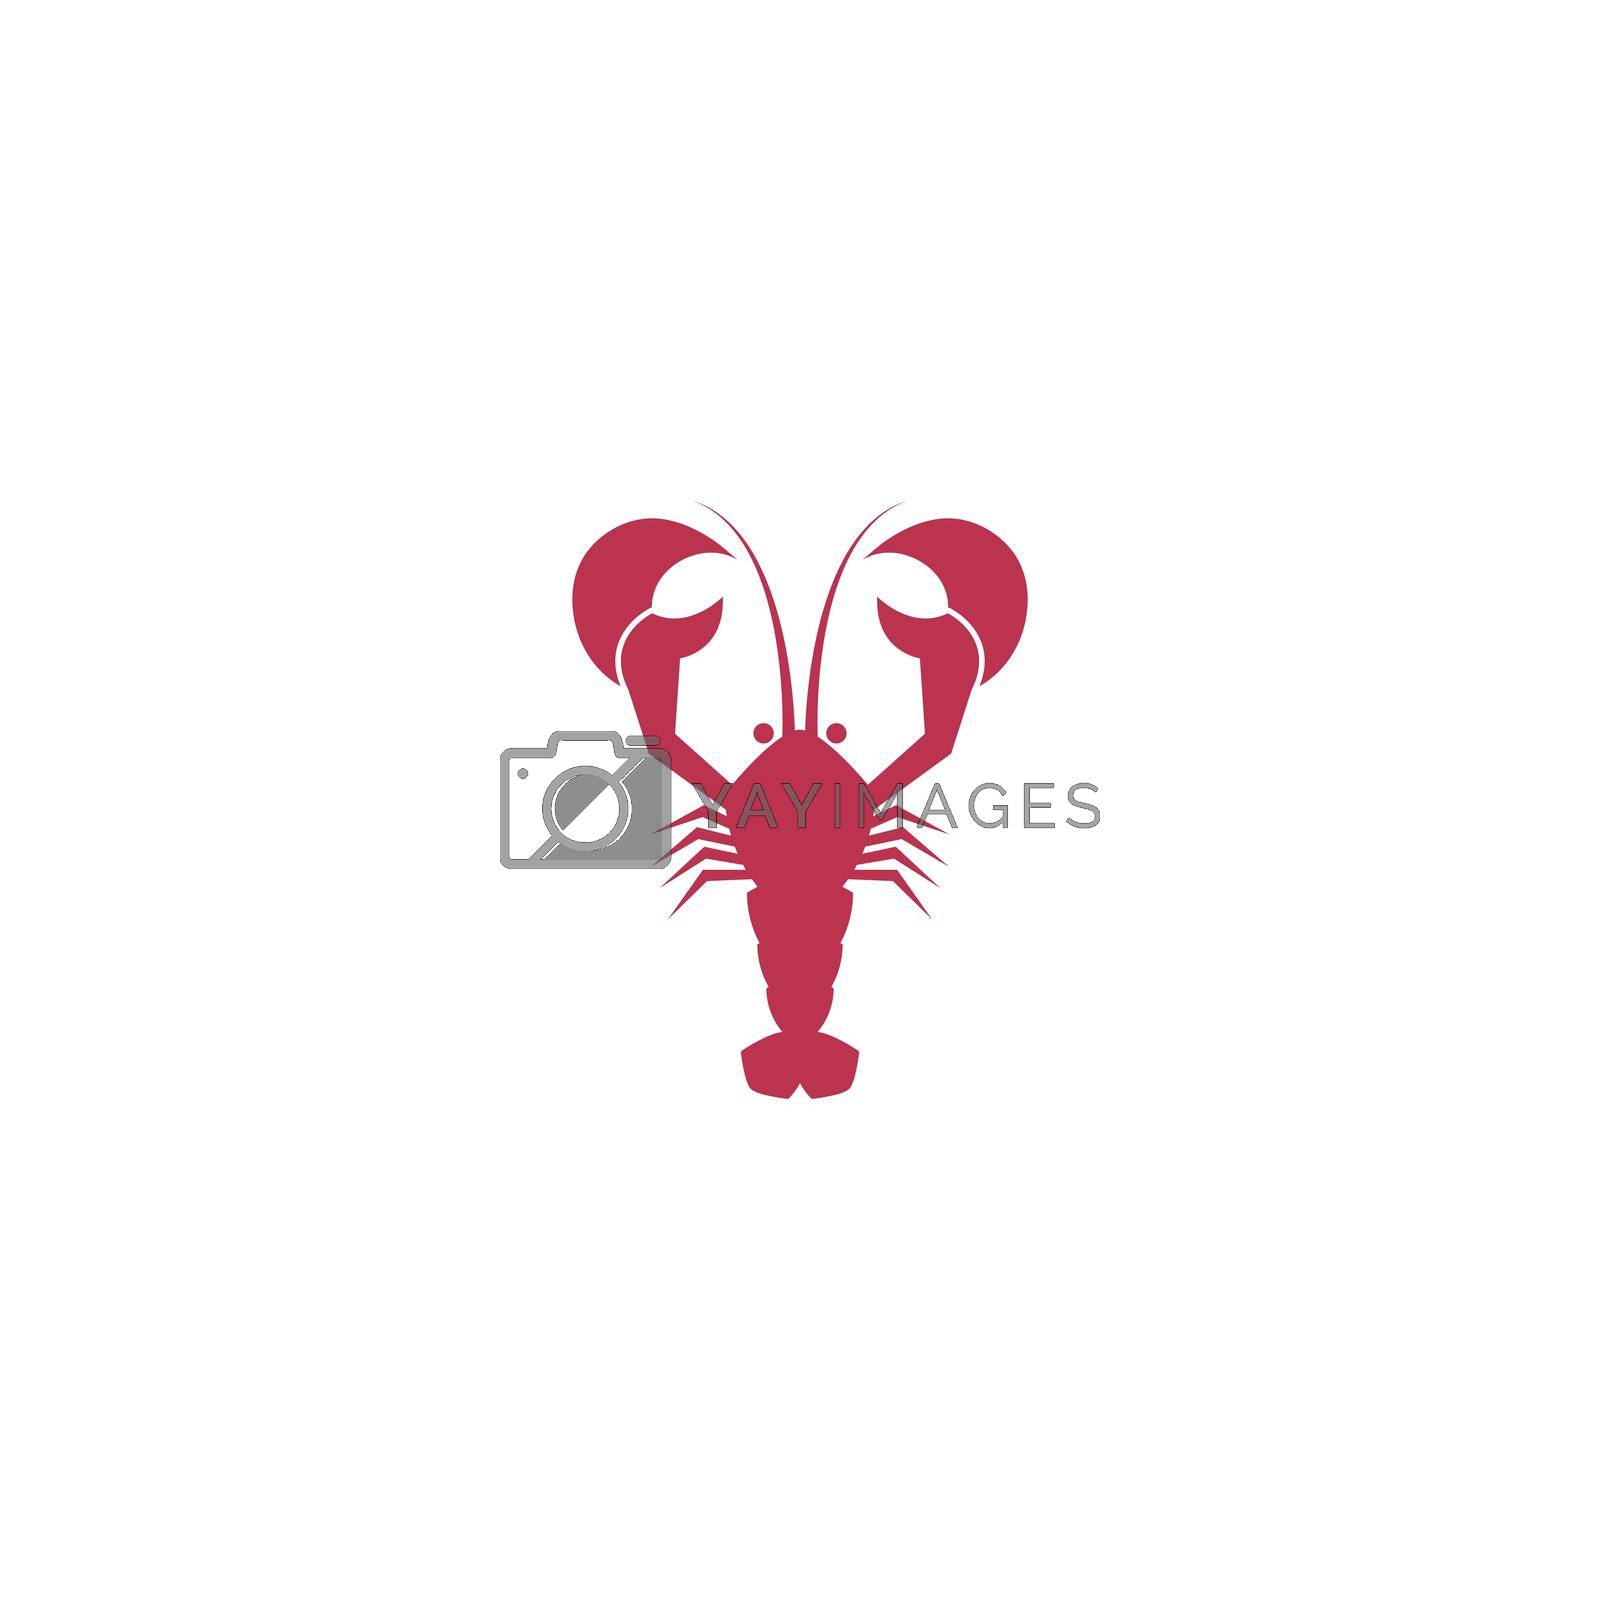 Royalty free image of Lobster logo  by awk